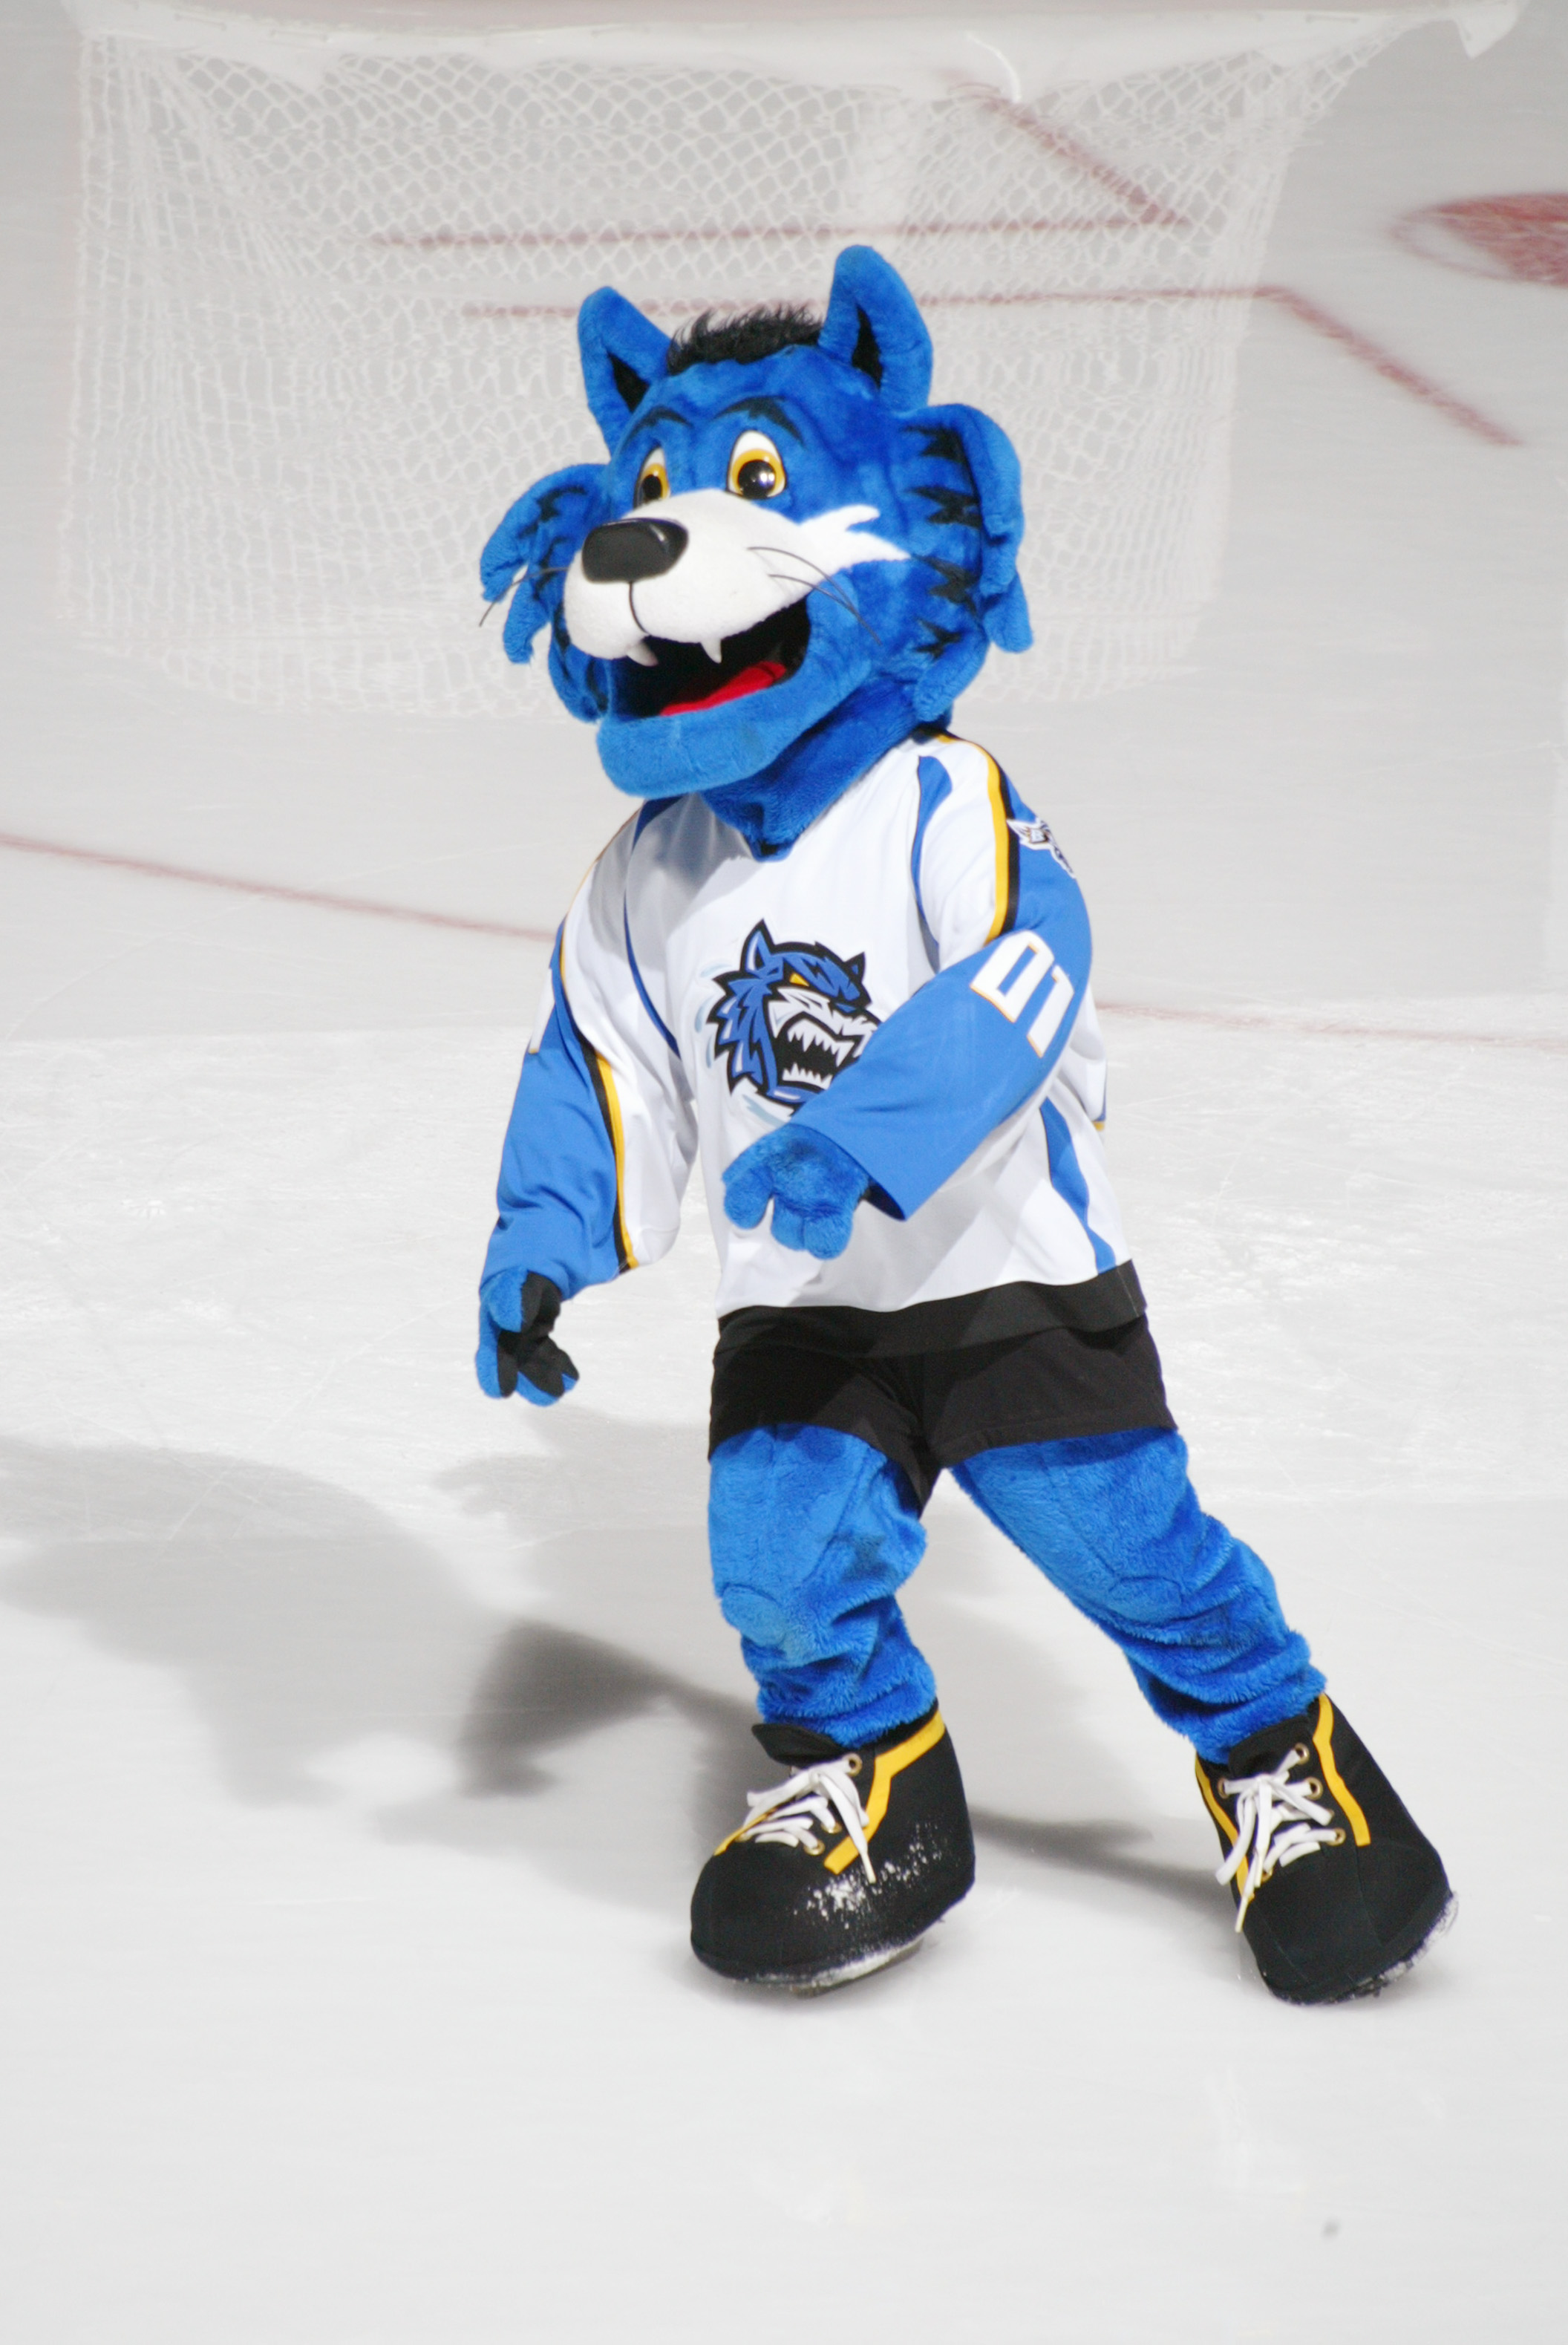 First time in 21 - Roscoe The Milwaukee Admirals Mascot